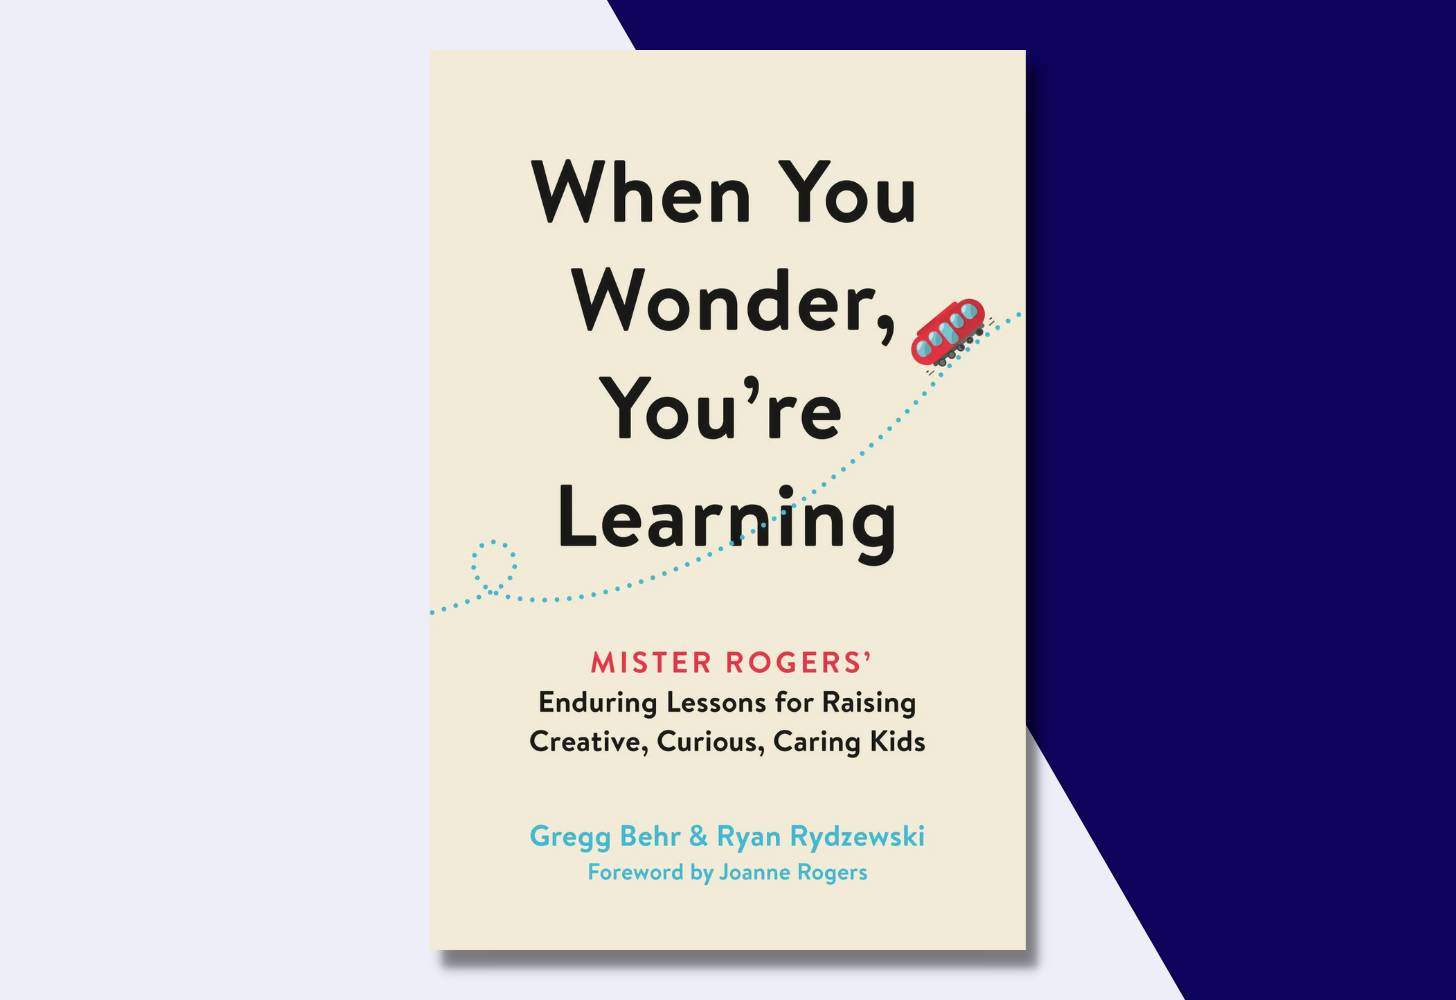 “When You Wonder, You’re Learning: Mister Rogers’ Enduring Lessons for Raising Creative, Curious, Caring Kids” by Gregg Behr and Ryan Rydzewski, foreword by Joanne Rogers